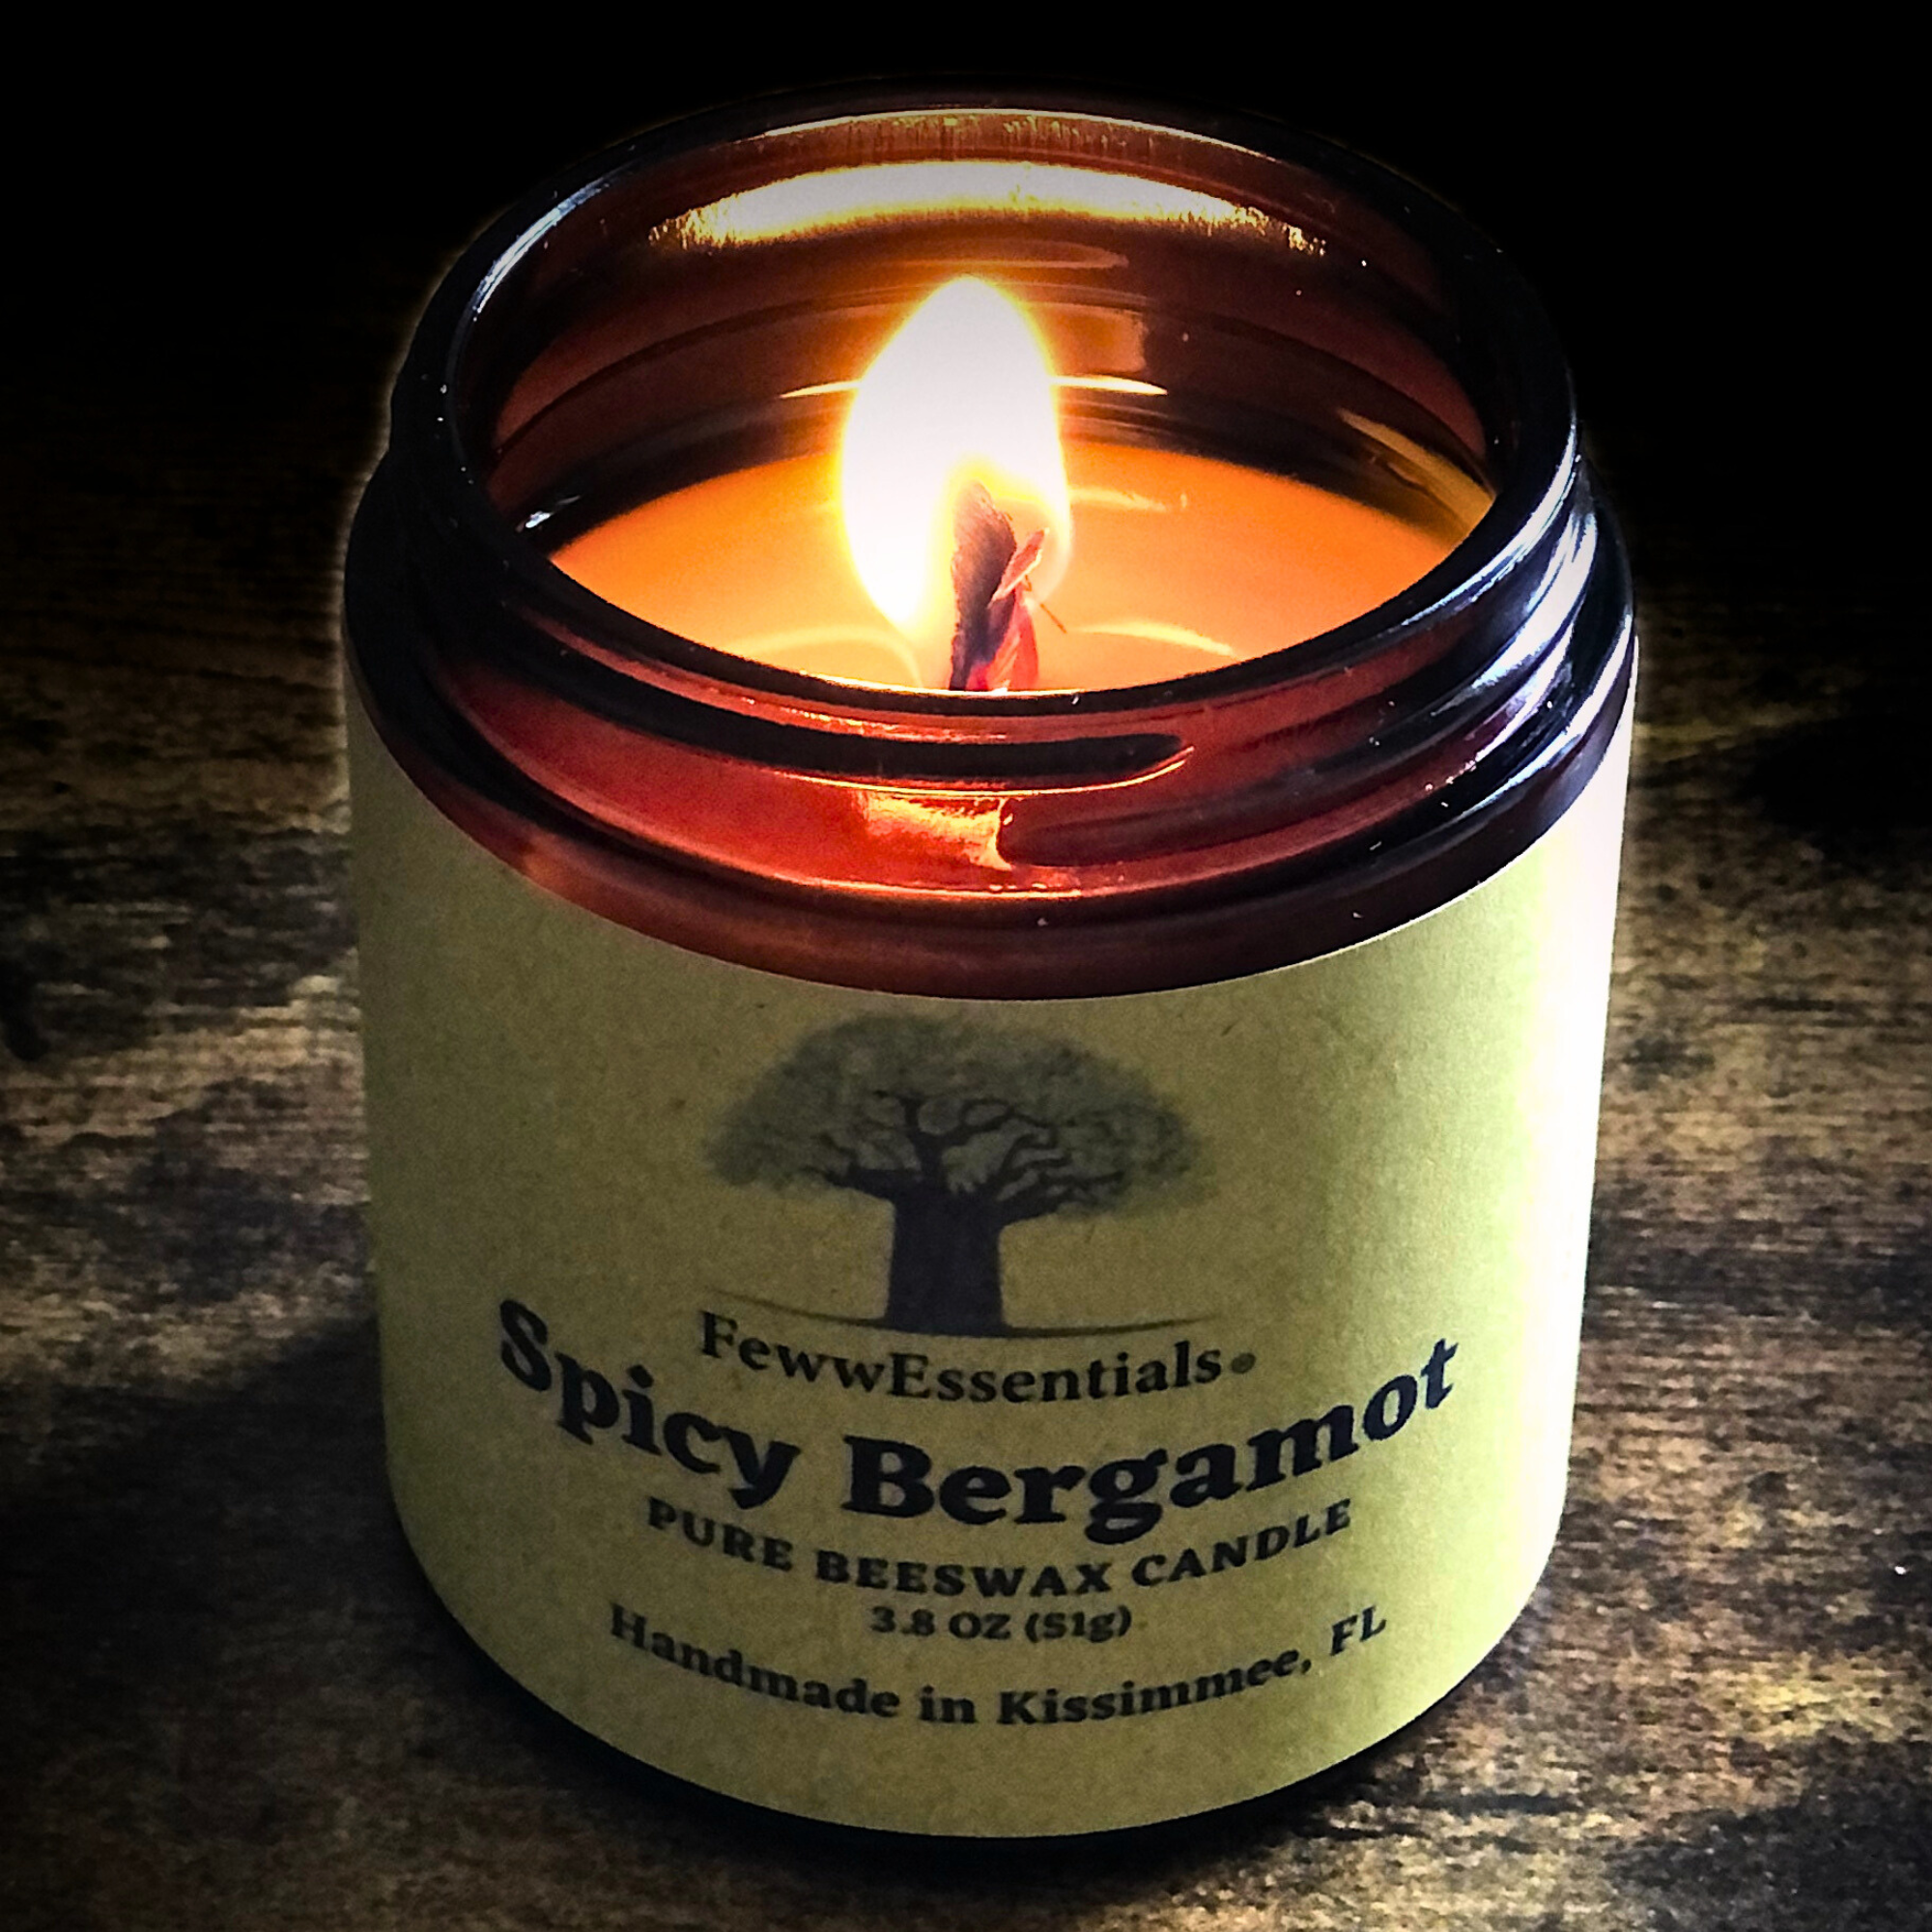 FewwEssentials Spicy Bergamot Beeswax Candle